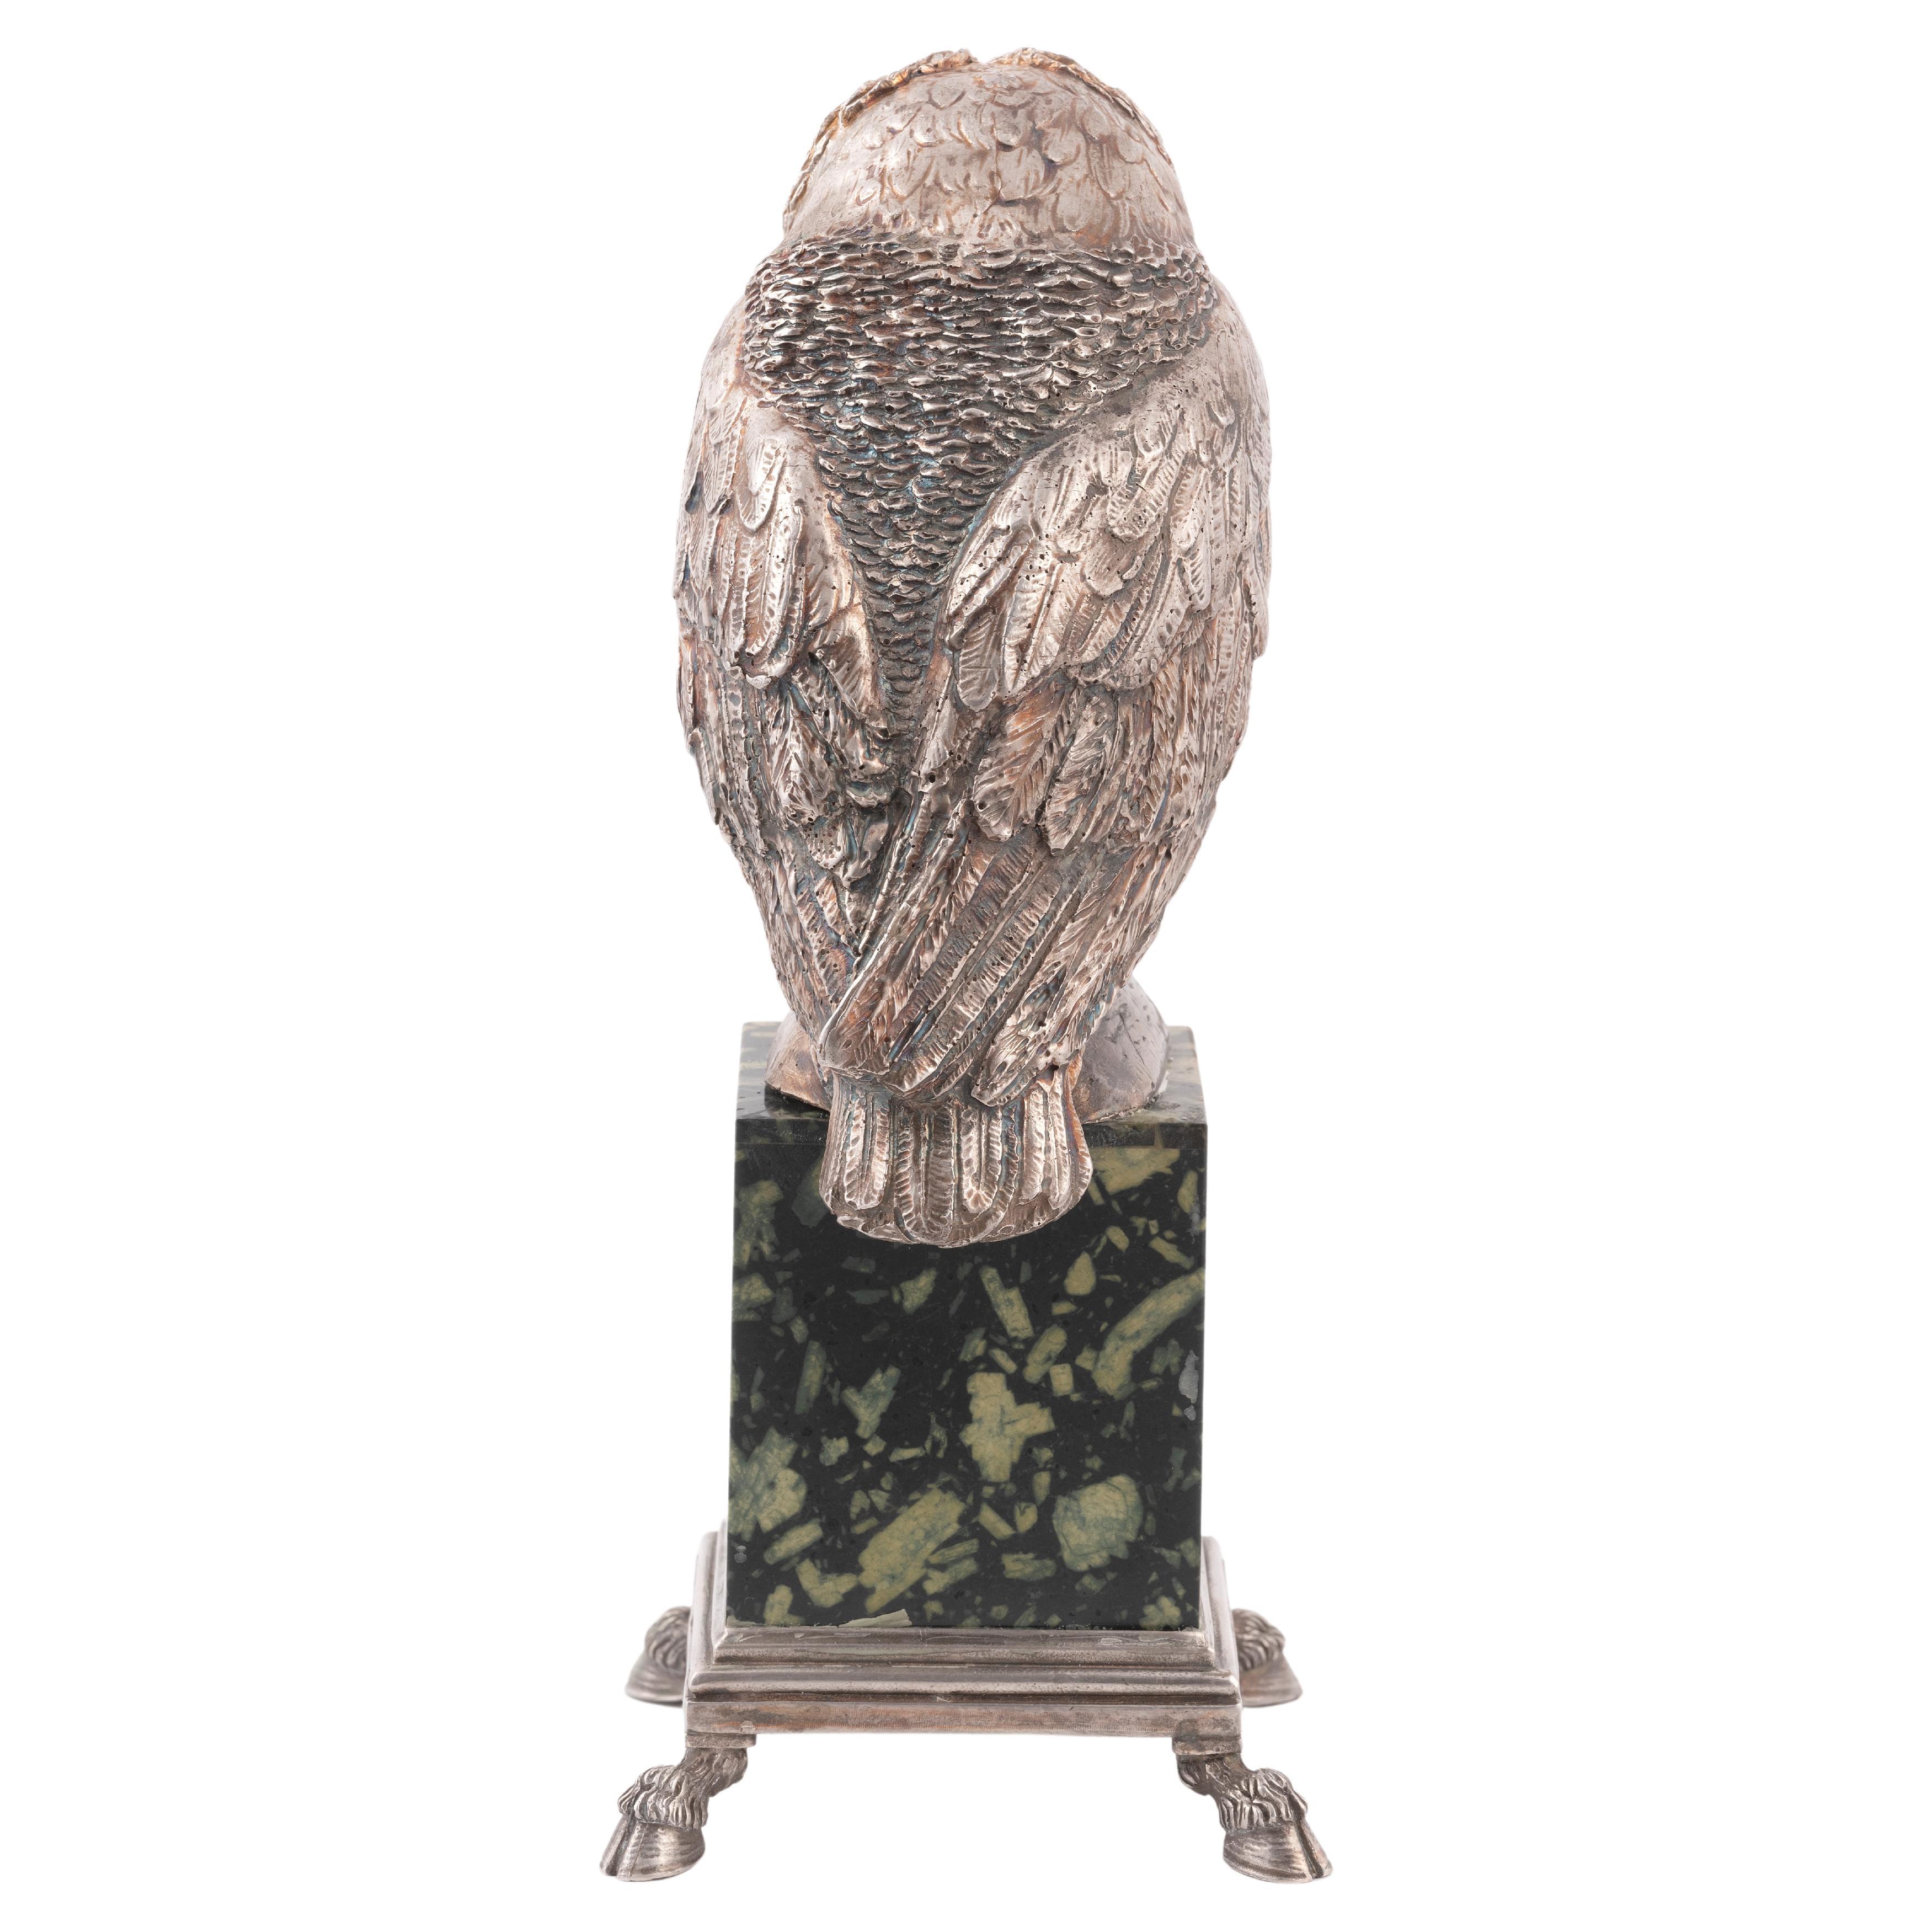 A parcel-gilt silver ornament modelled as an owl on marble base.
With Italian maker marks circa 1890's
With glass eyes and feather-effect texturing, height 28cm,